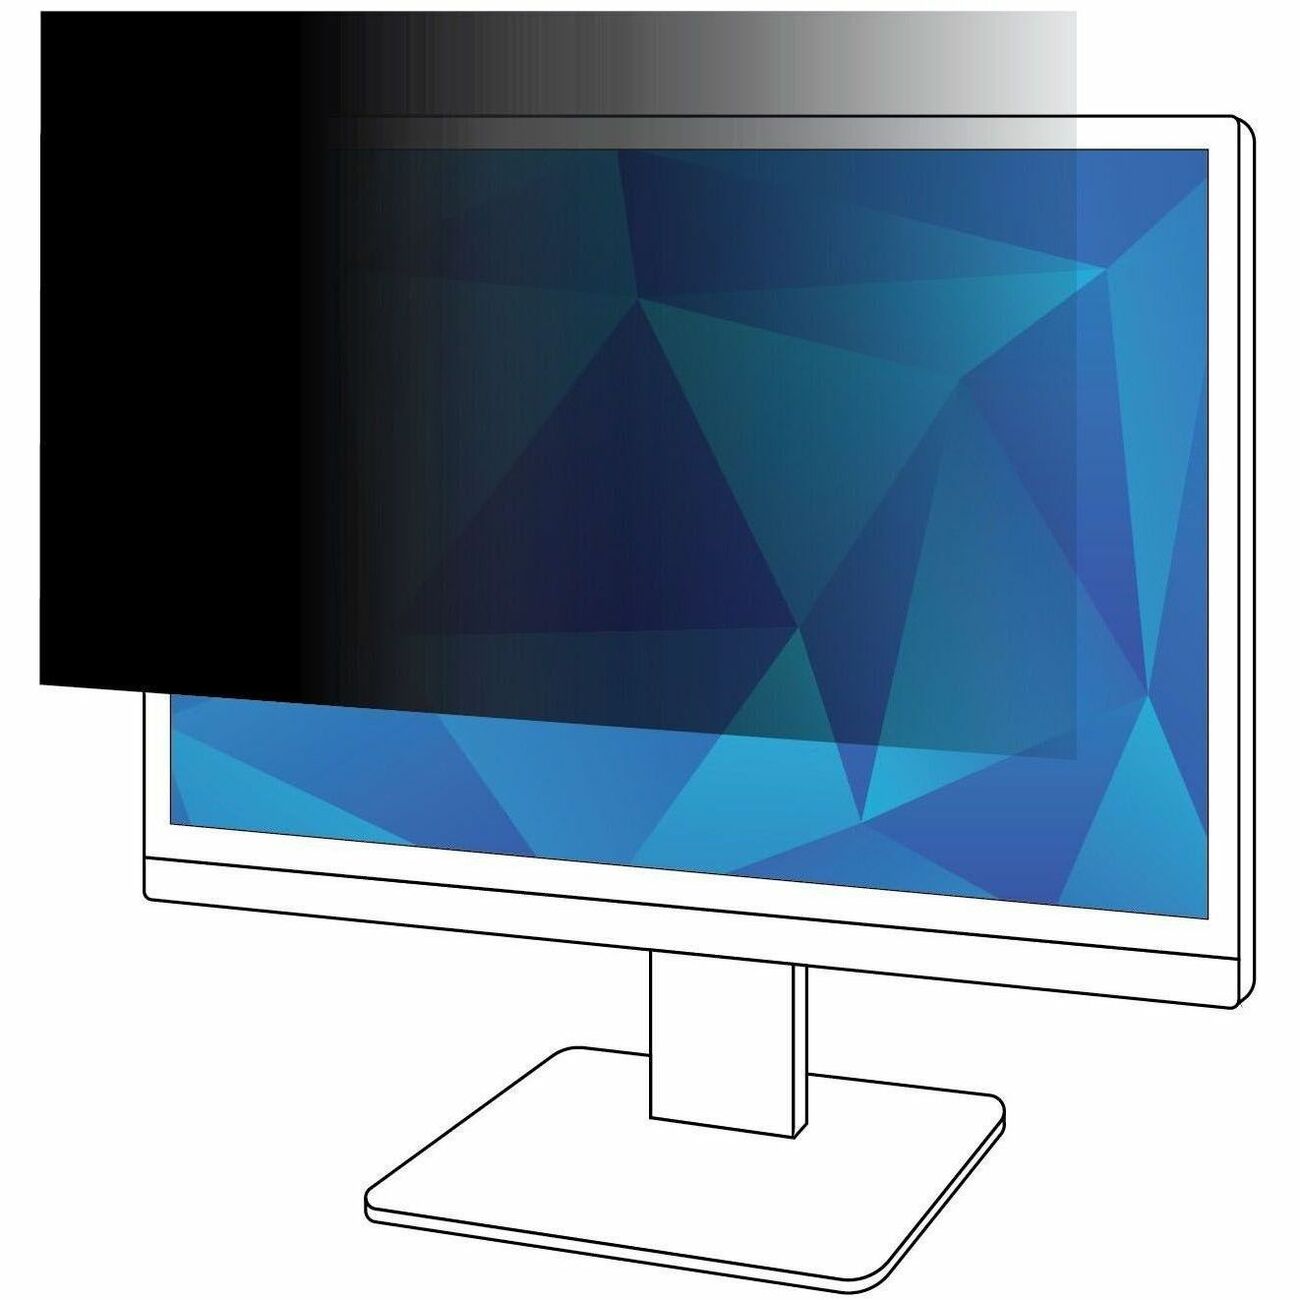 3m-privacy-filter-for-30in-monitor-1610-pf300w1b-for-30-widescreen-lcd-monitor-1610-scratch-resistant-fingerprint-resistant-dust-resistant-anti-glare_mmmpf300w1b - 1